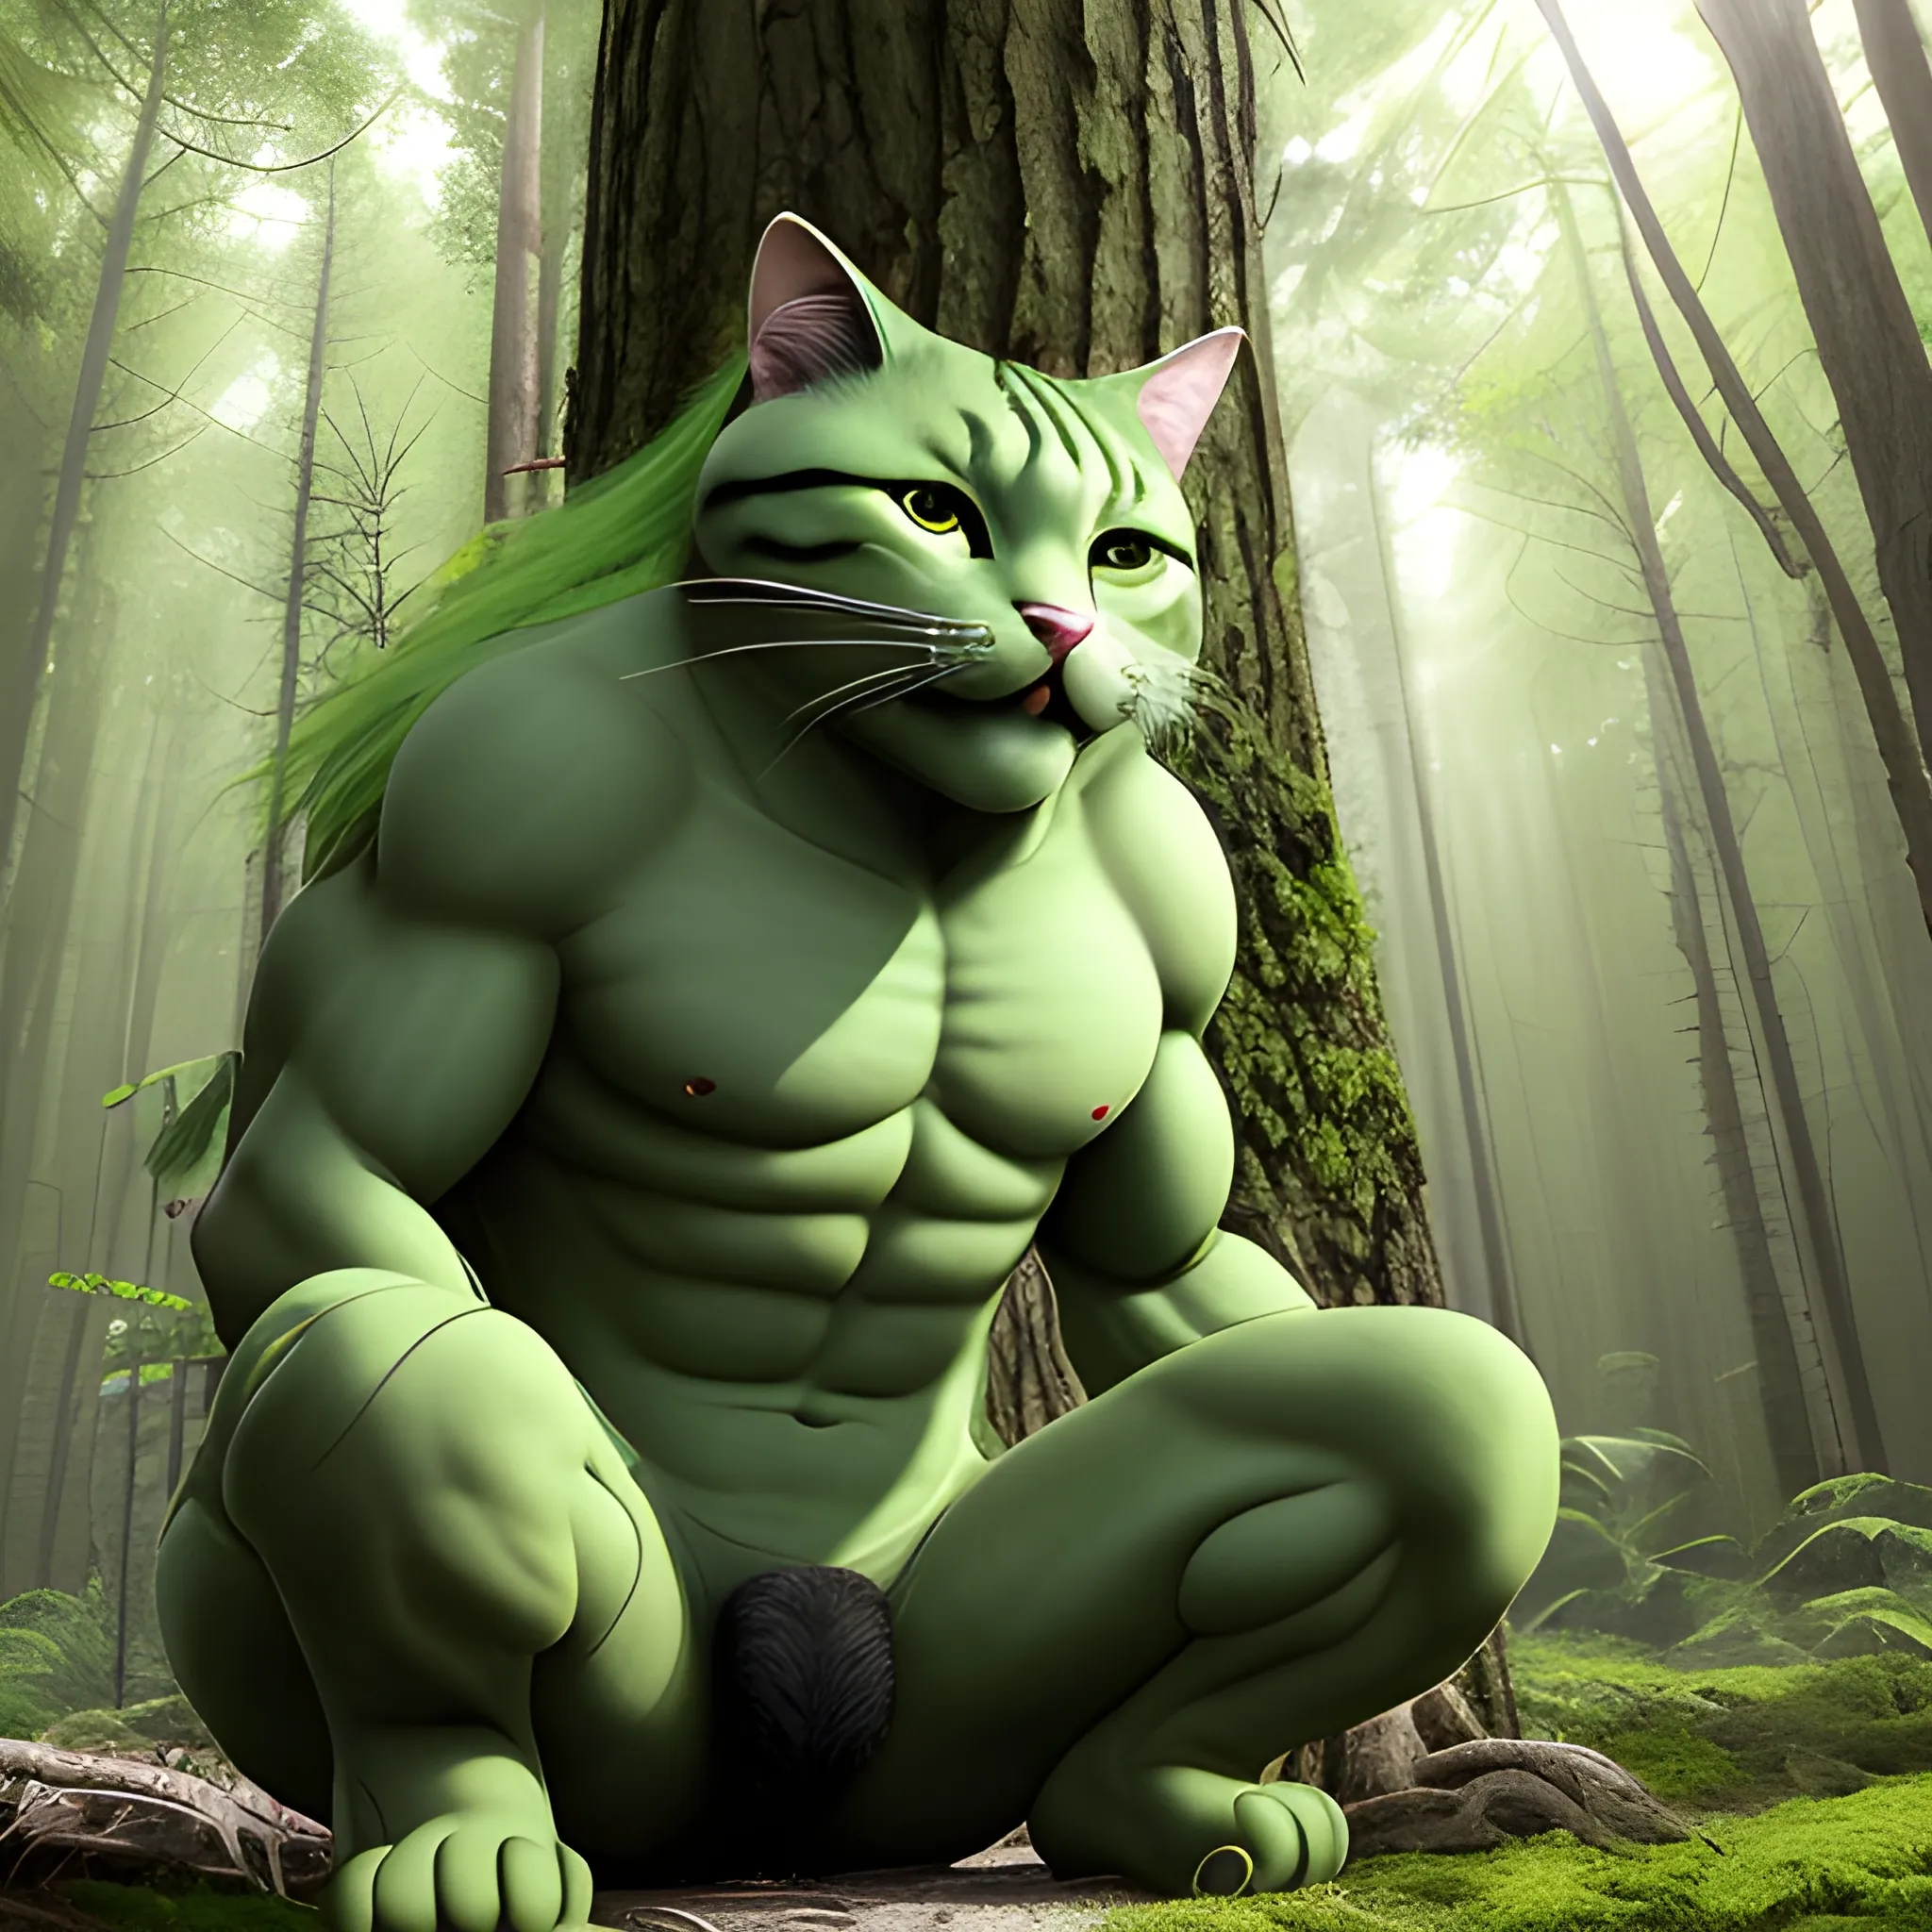 In the sunny forest, there is a very tall and strong "green cat" with very developed muscles. 鳄鱼 is standing and lying on the ground with wounds all over his body. Surreal photos and ultra-real details. 超高分辨率，真正的获奖作品